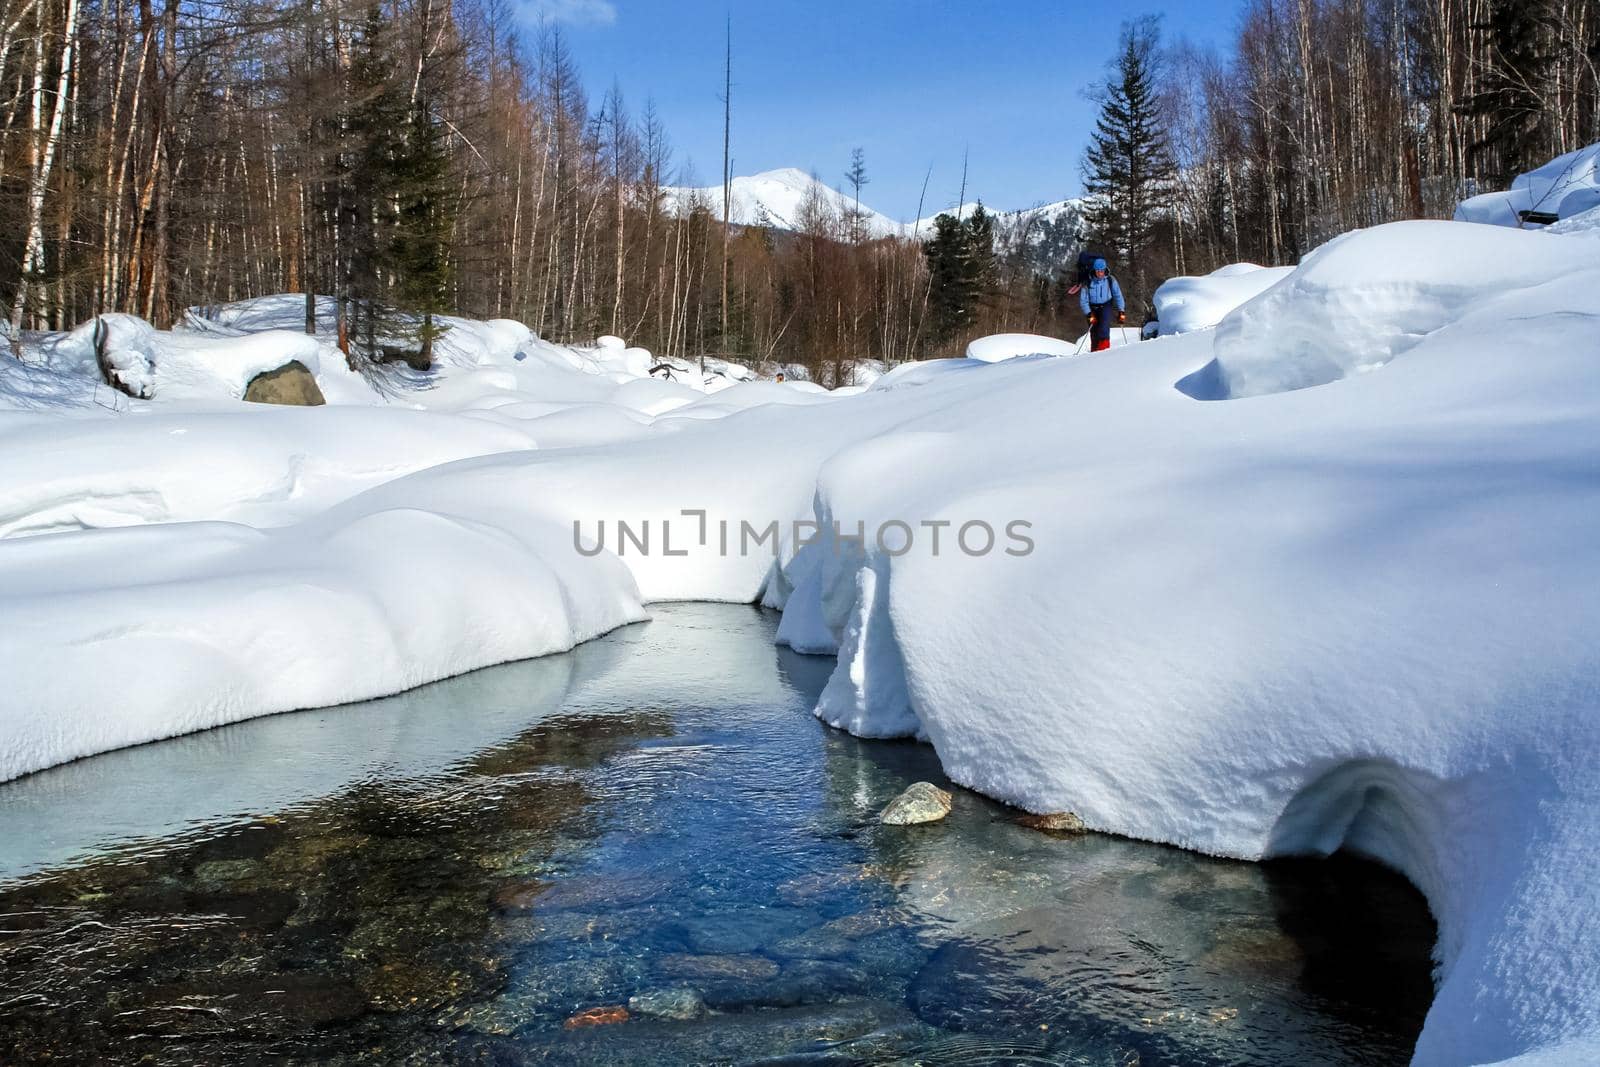 section of the river free of snow and ice. The nature of baikal. by DePo